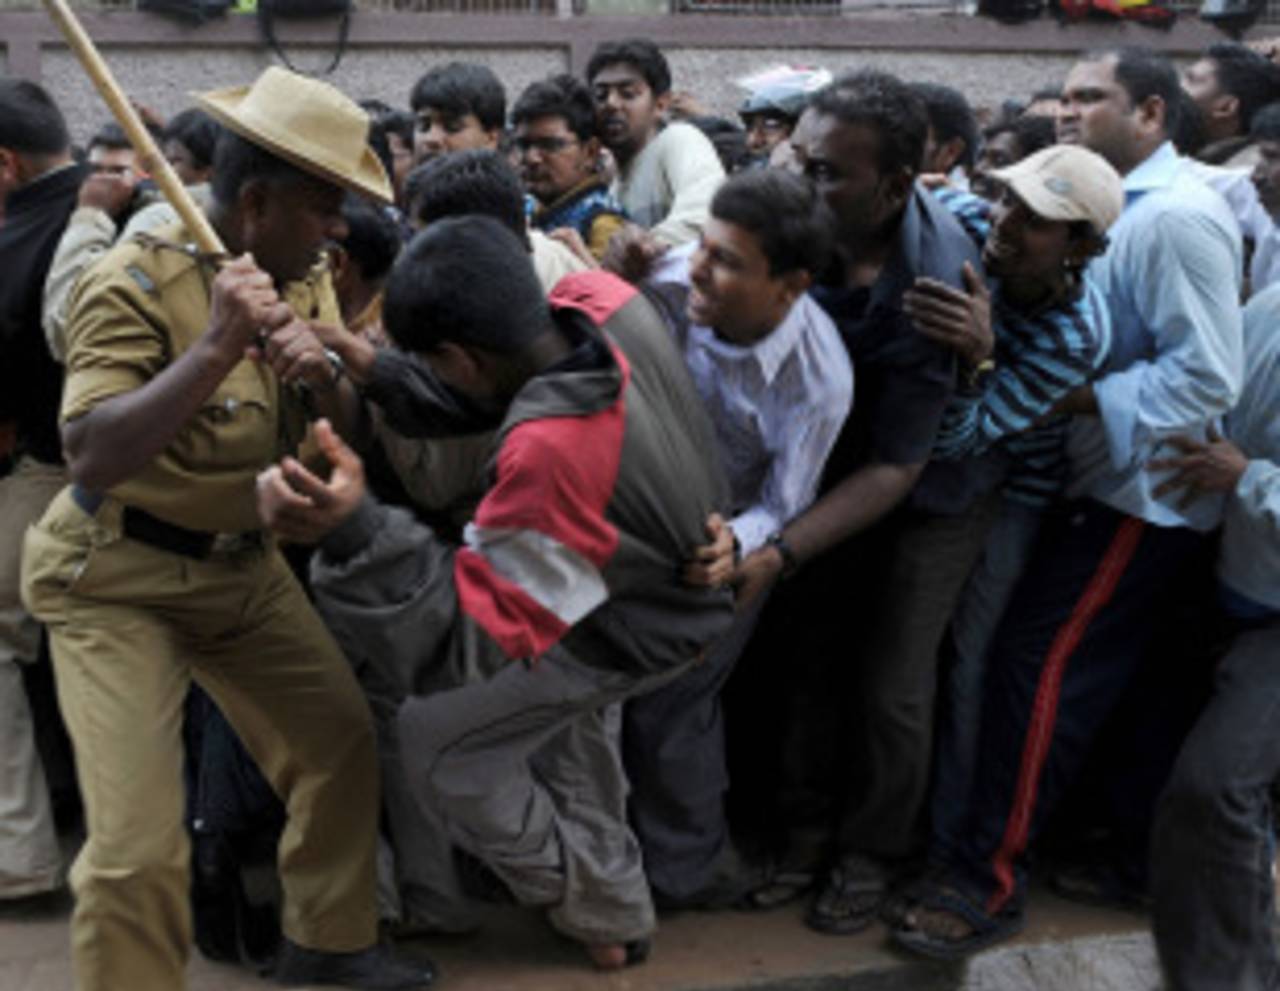 A policeman tries to control the crowd after a mini-stampede broke out among people queuing up for tickets for the India-England game outside the M Chinnaswamy stadium, Bangalore, February 24, 2011